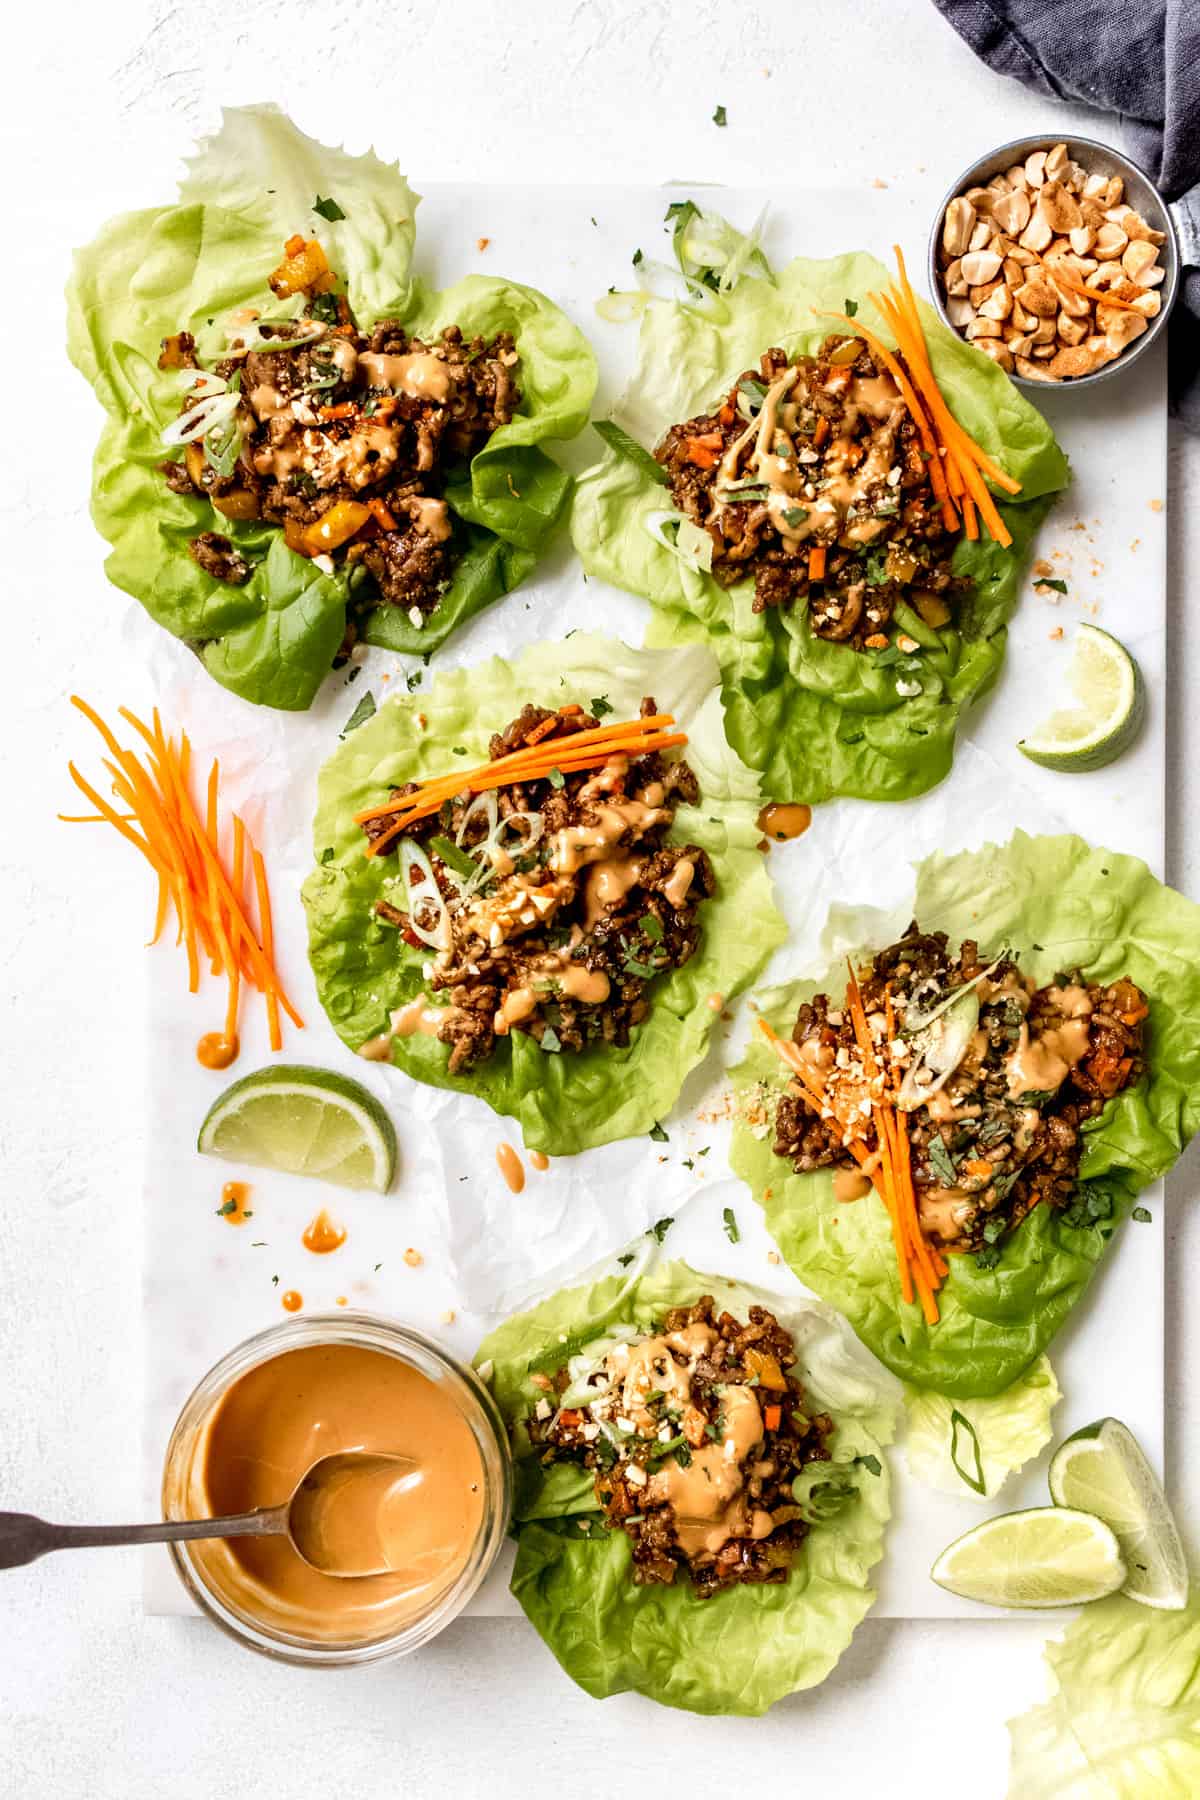 yuk sung - pork mince lettuce wraps on a white table with peanut sauce. 